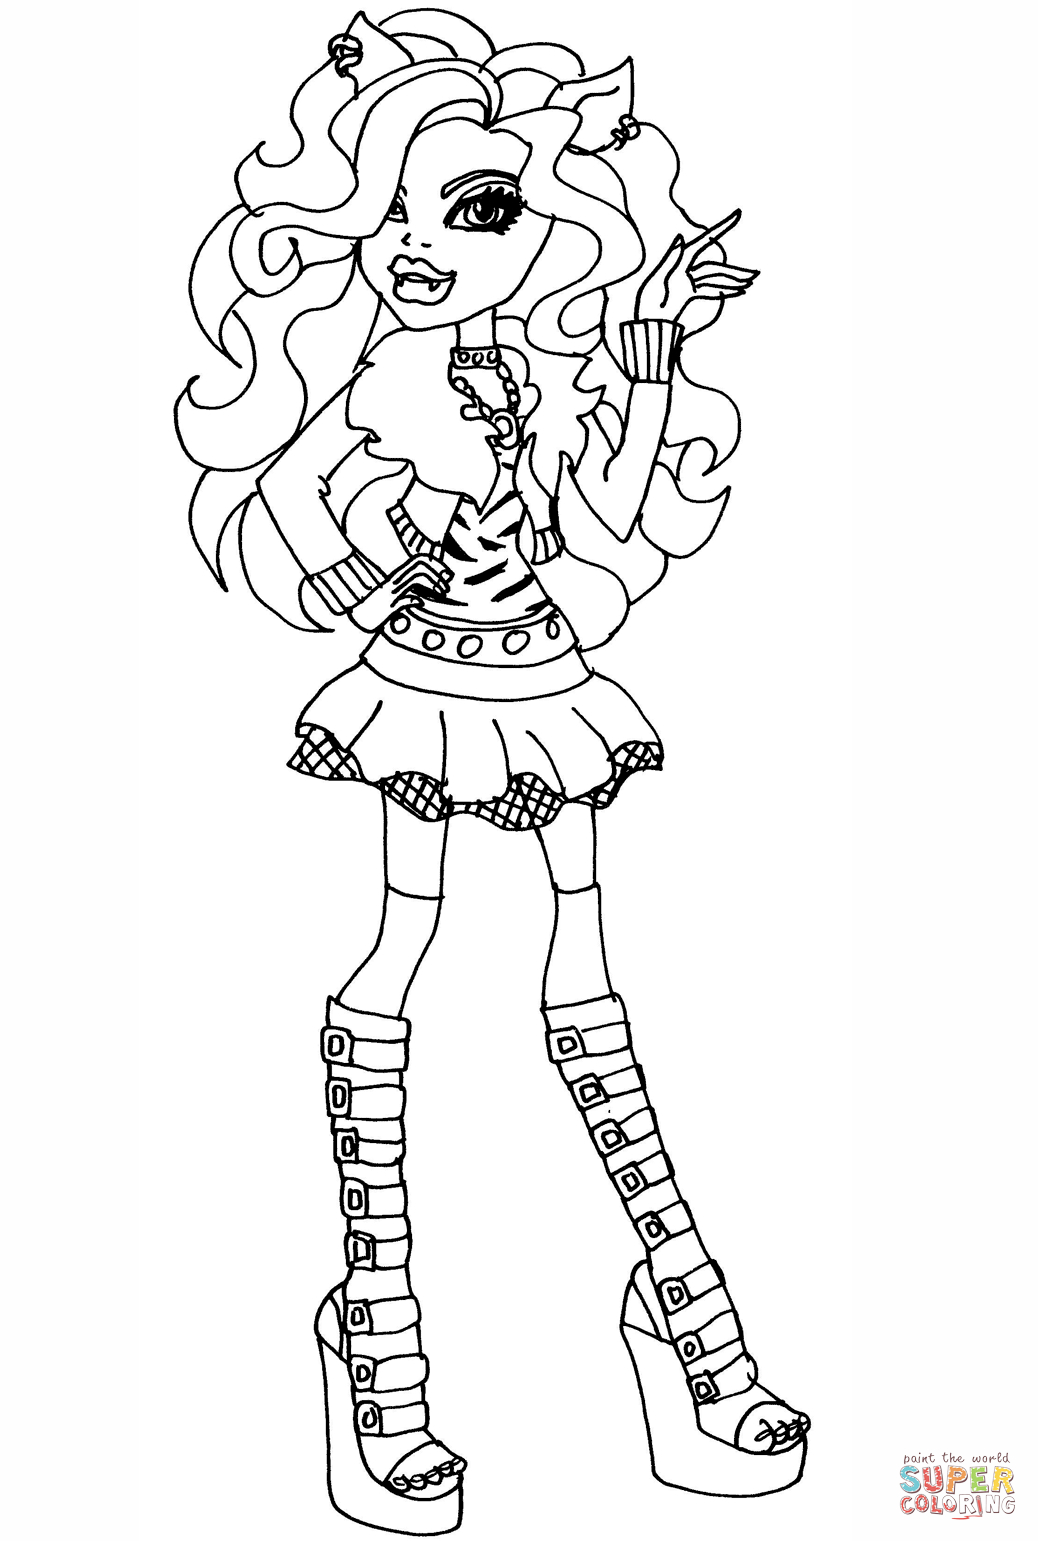 Monster High Coloring Pages Free Printable Monster High Clawdeen Wolf Coloring Page Free Printable Coloring Pages